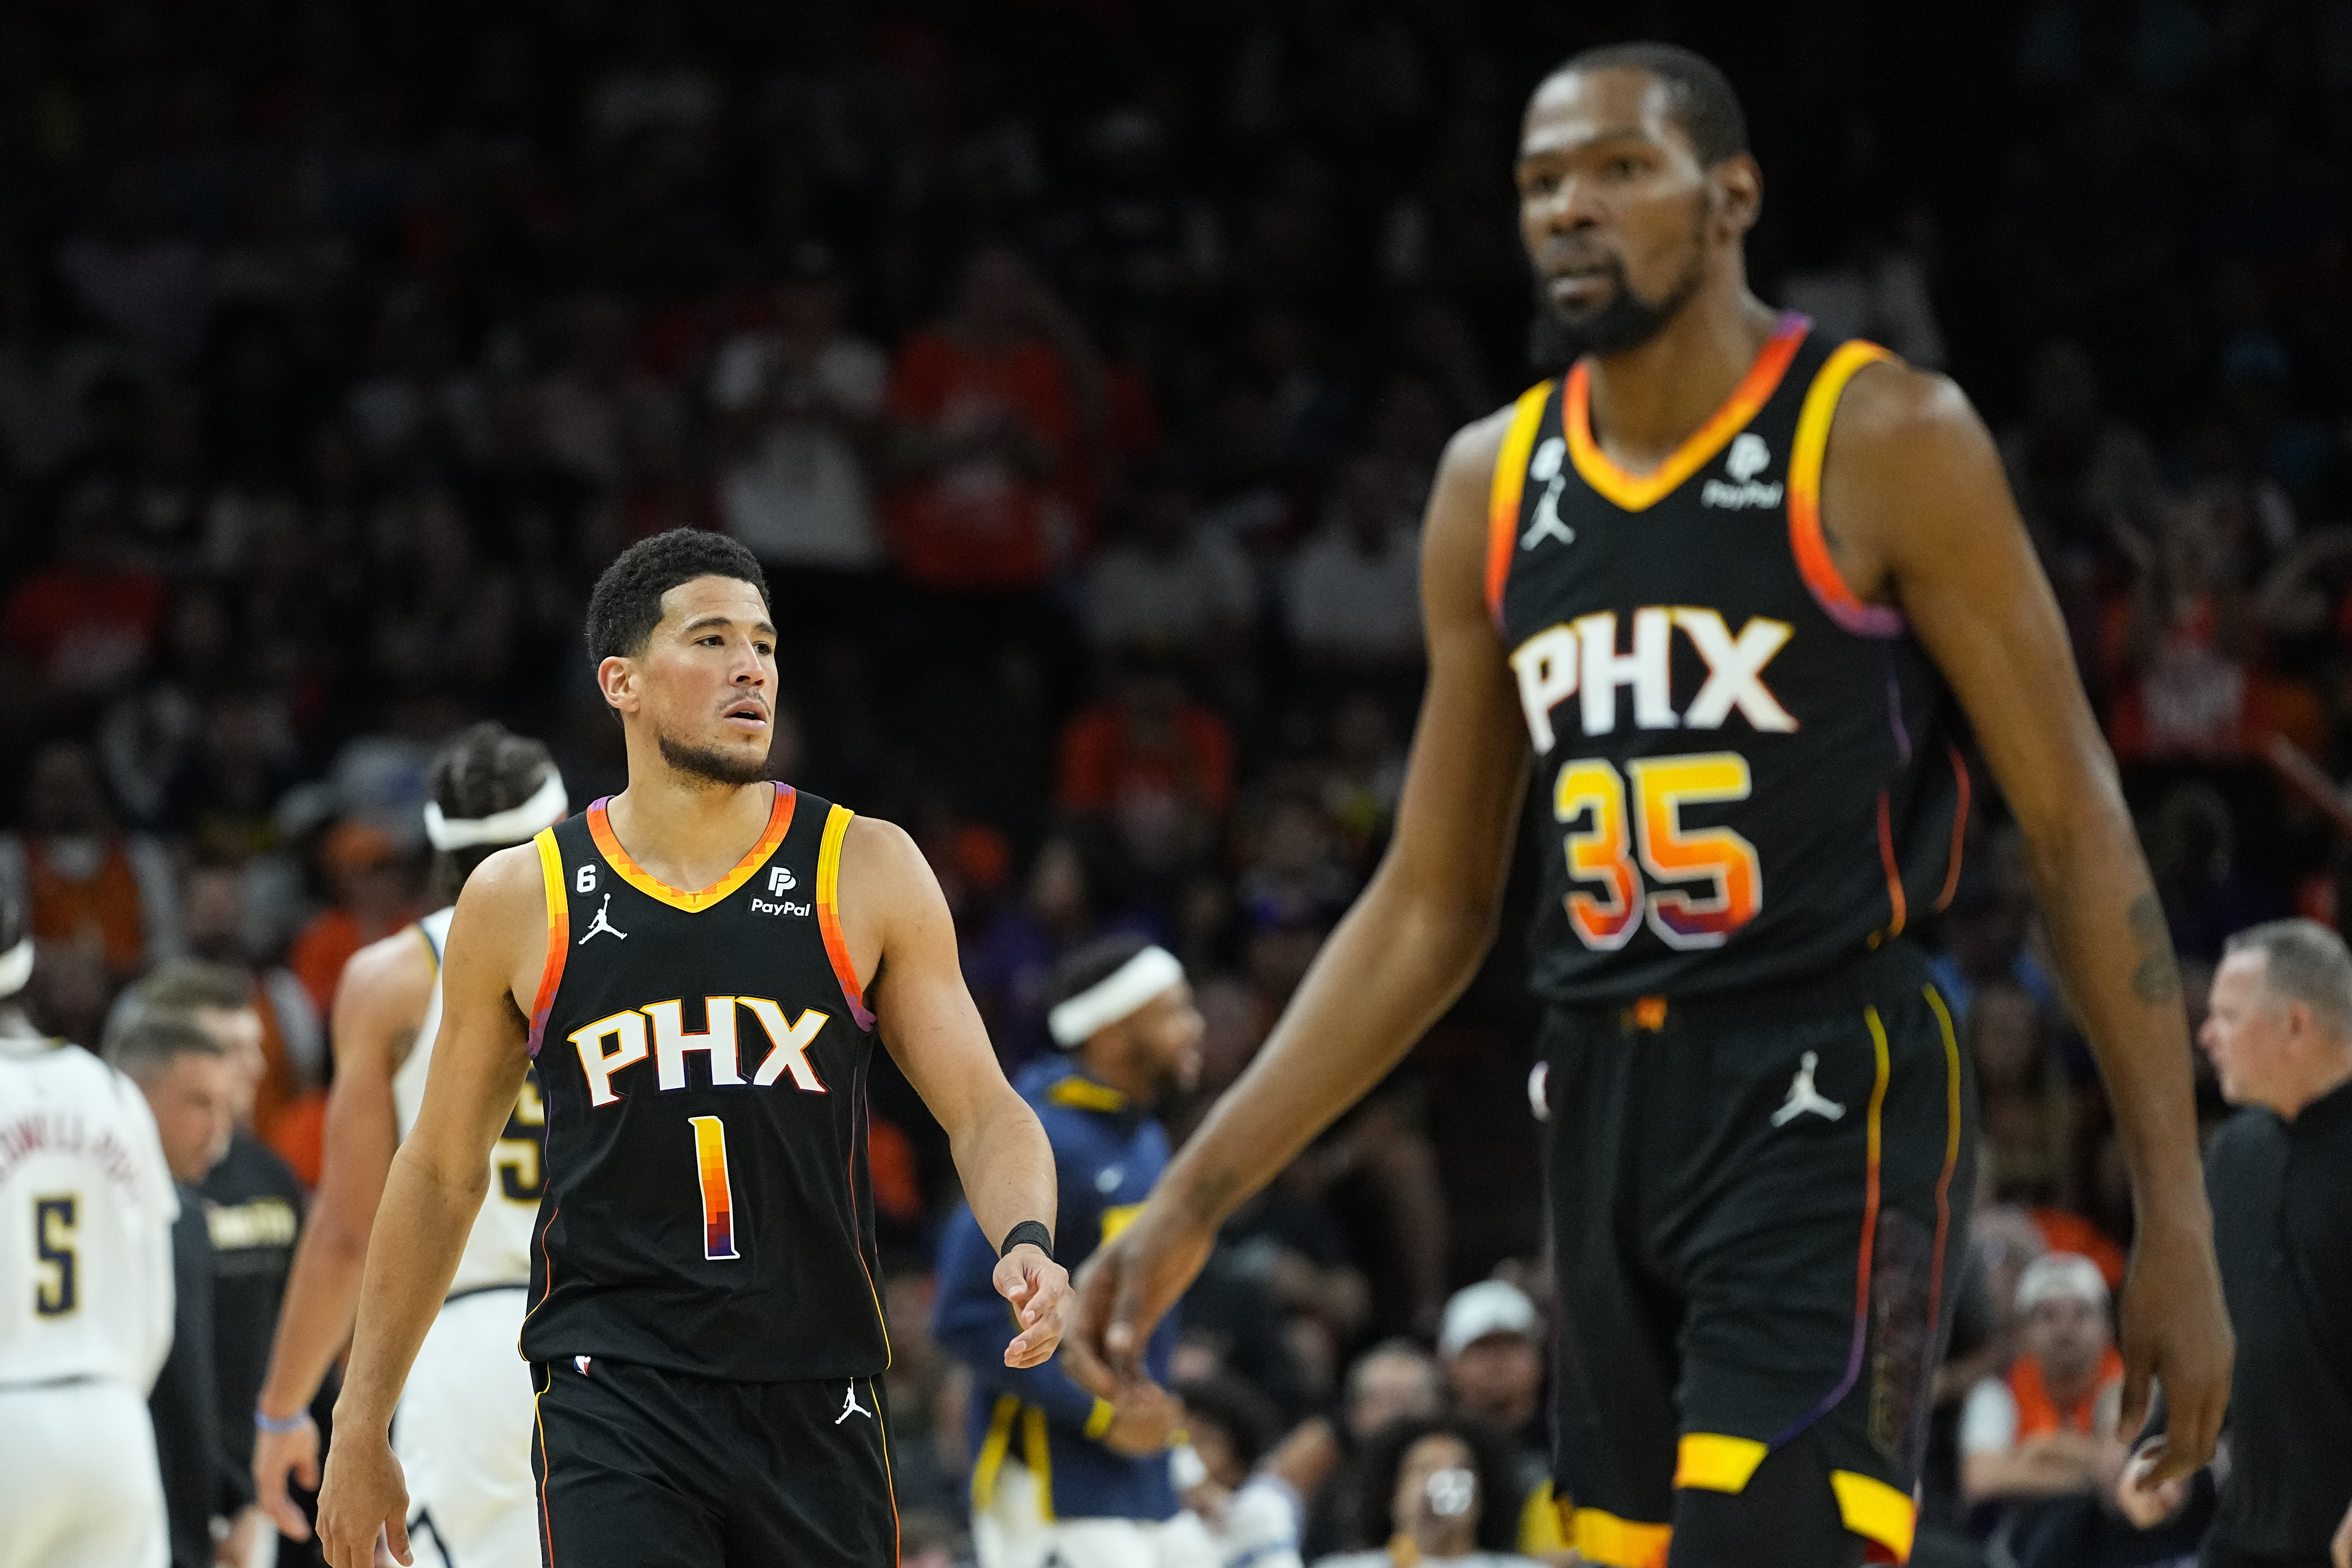 Grading the Week: Devin Booker rewarding Suns in 4 Ball Arena